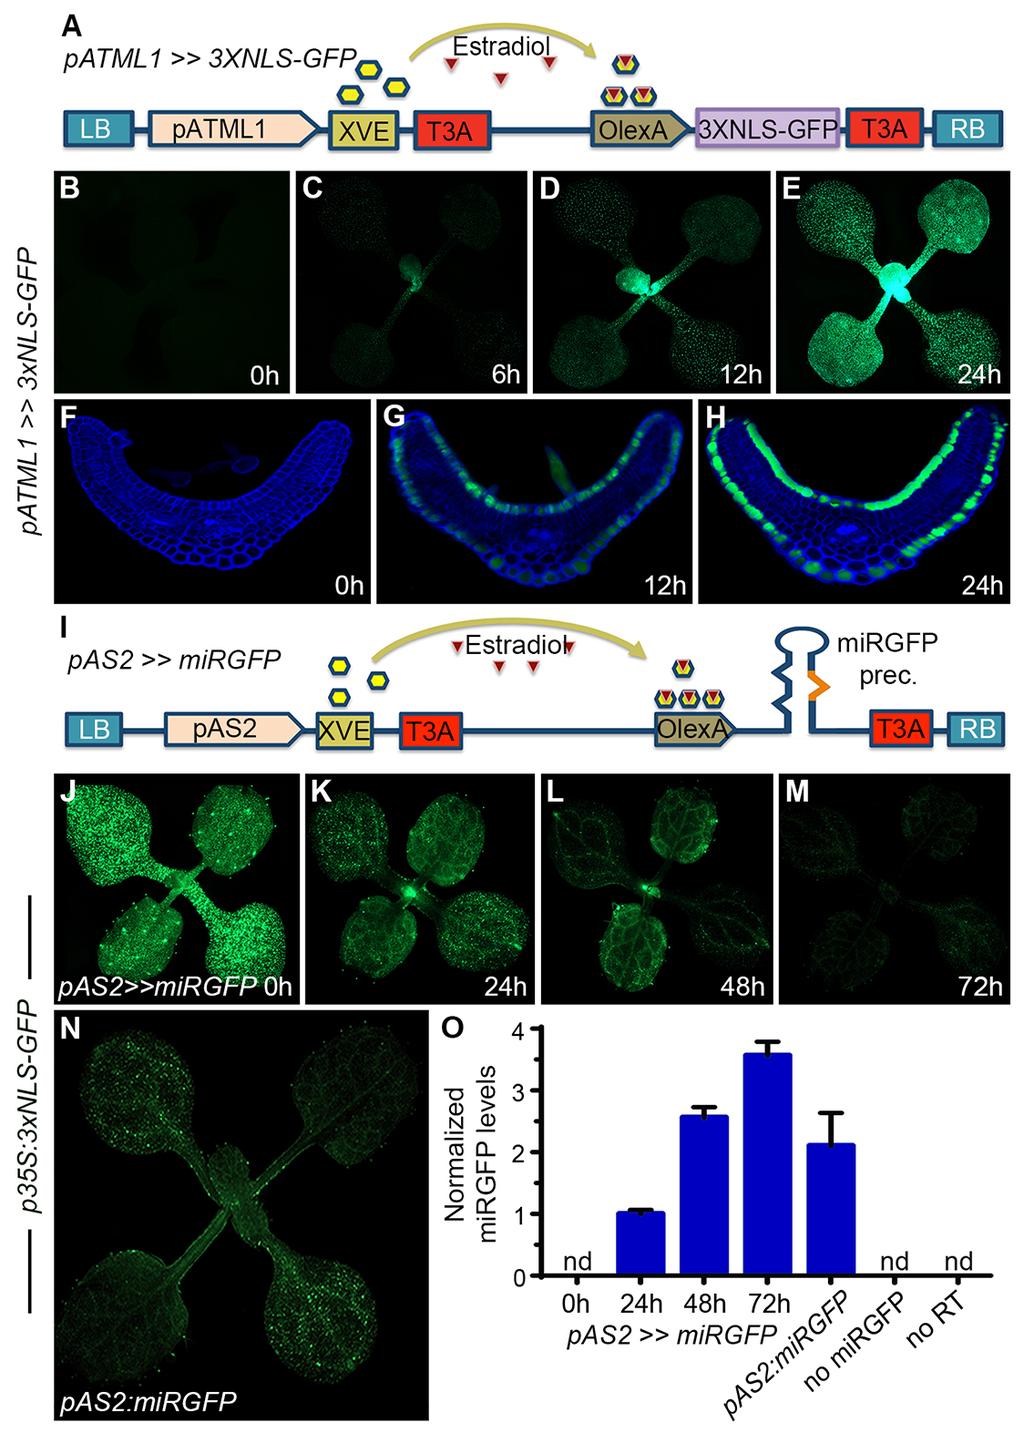 Supplemental Figure 6. Characterization of the estradiol-inducible mirgfp system; Related to Figure 4. (A) Schematic of the epidermal-specific, estradiol-inducible patml1>>3xnls-gfp construct.